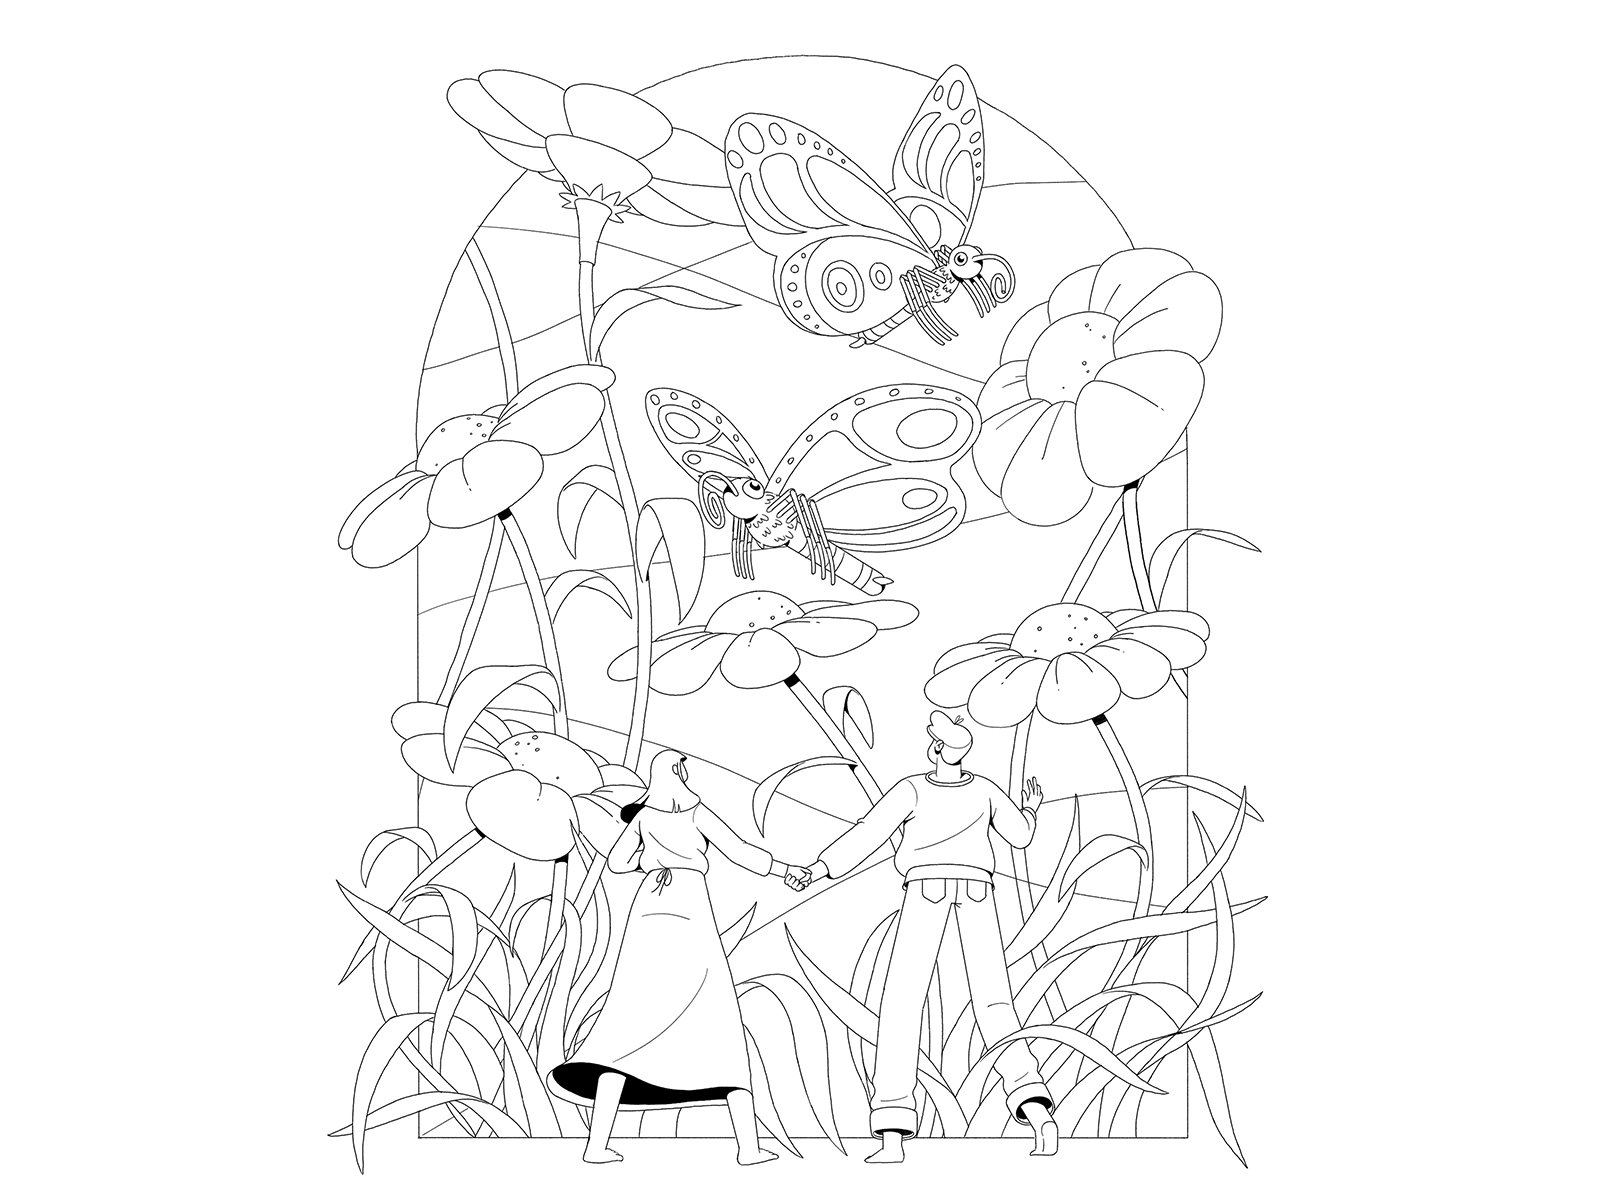 Daydreaming foliage woman man grass linework nature flowers plants butterflies characterdesign drawing graphic character vector illustration